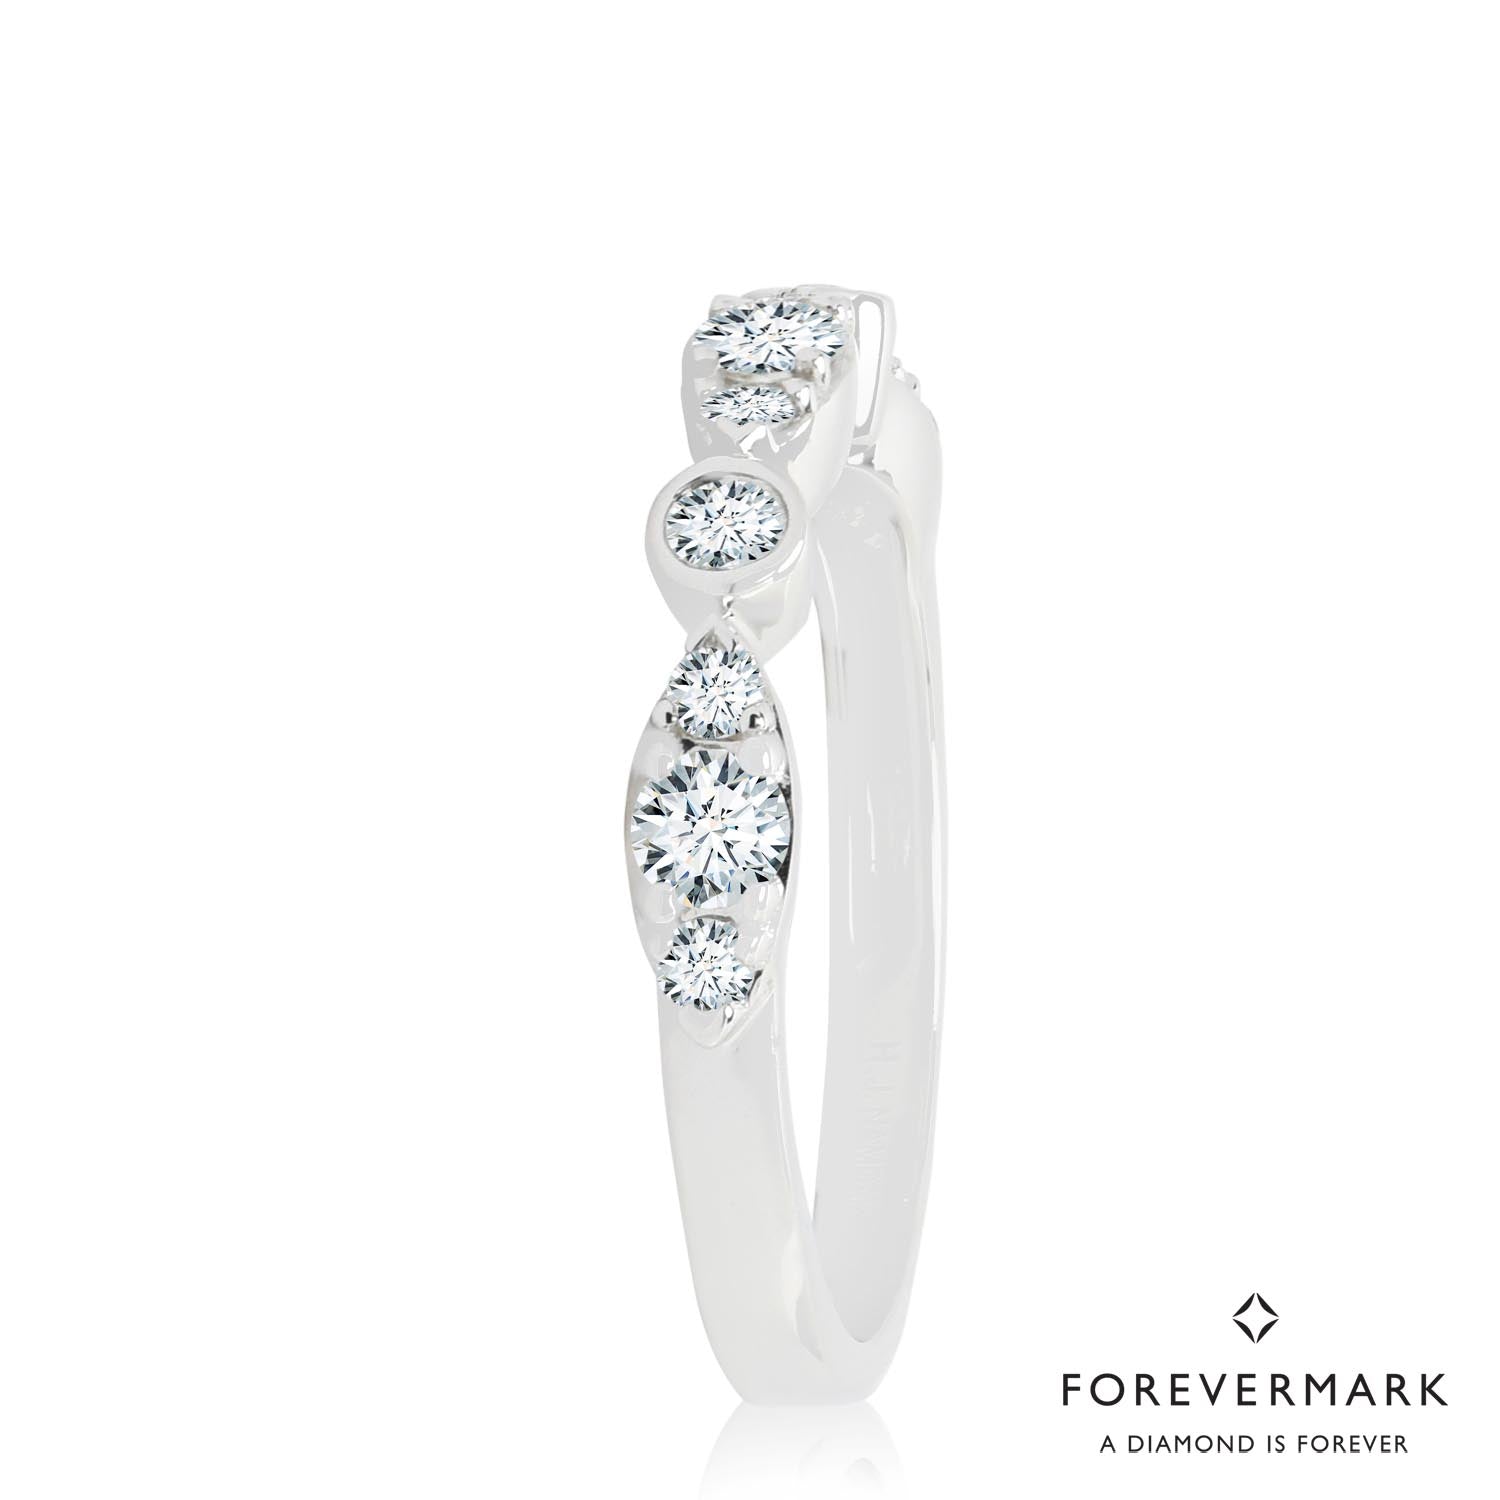 De Beers Forevermark Tribute Collection Diamond Band in 18kt White Gold (1/2ct tw)